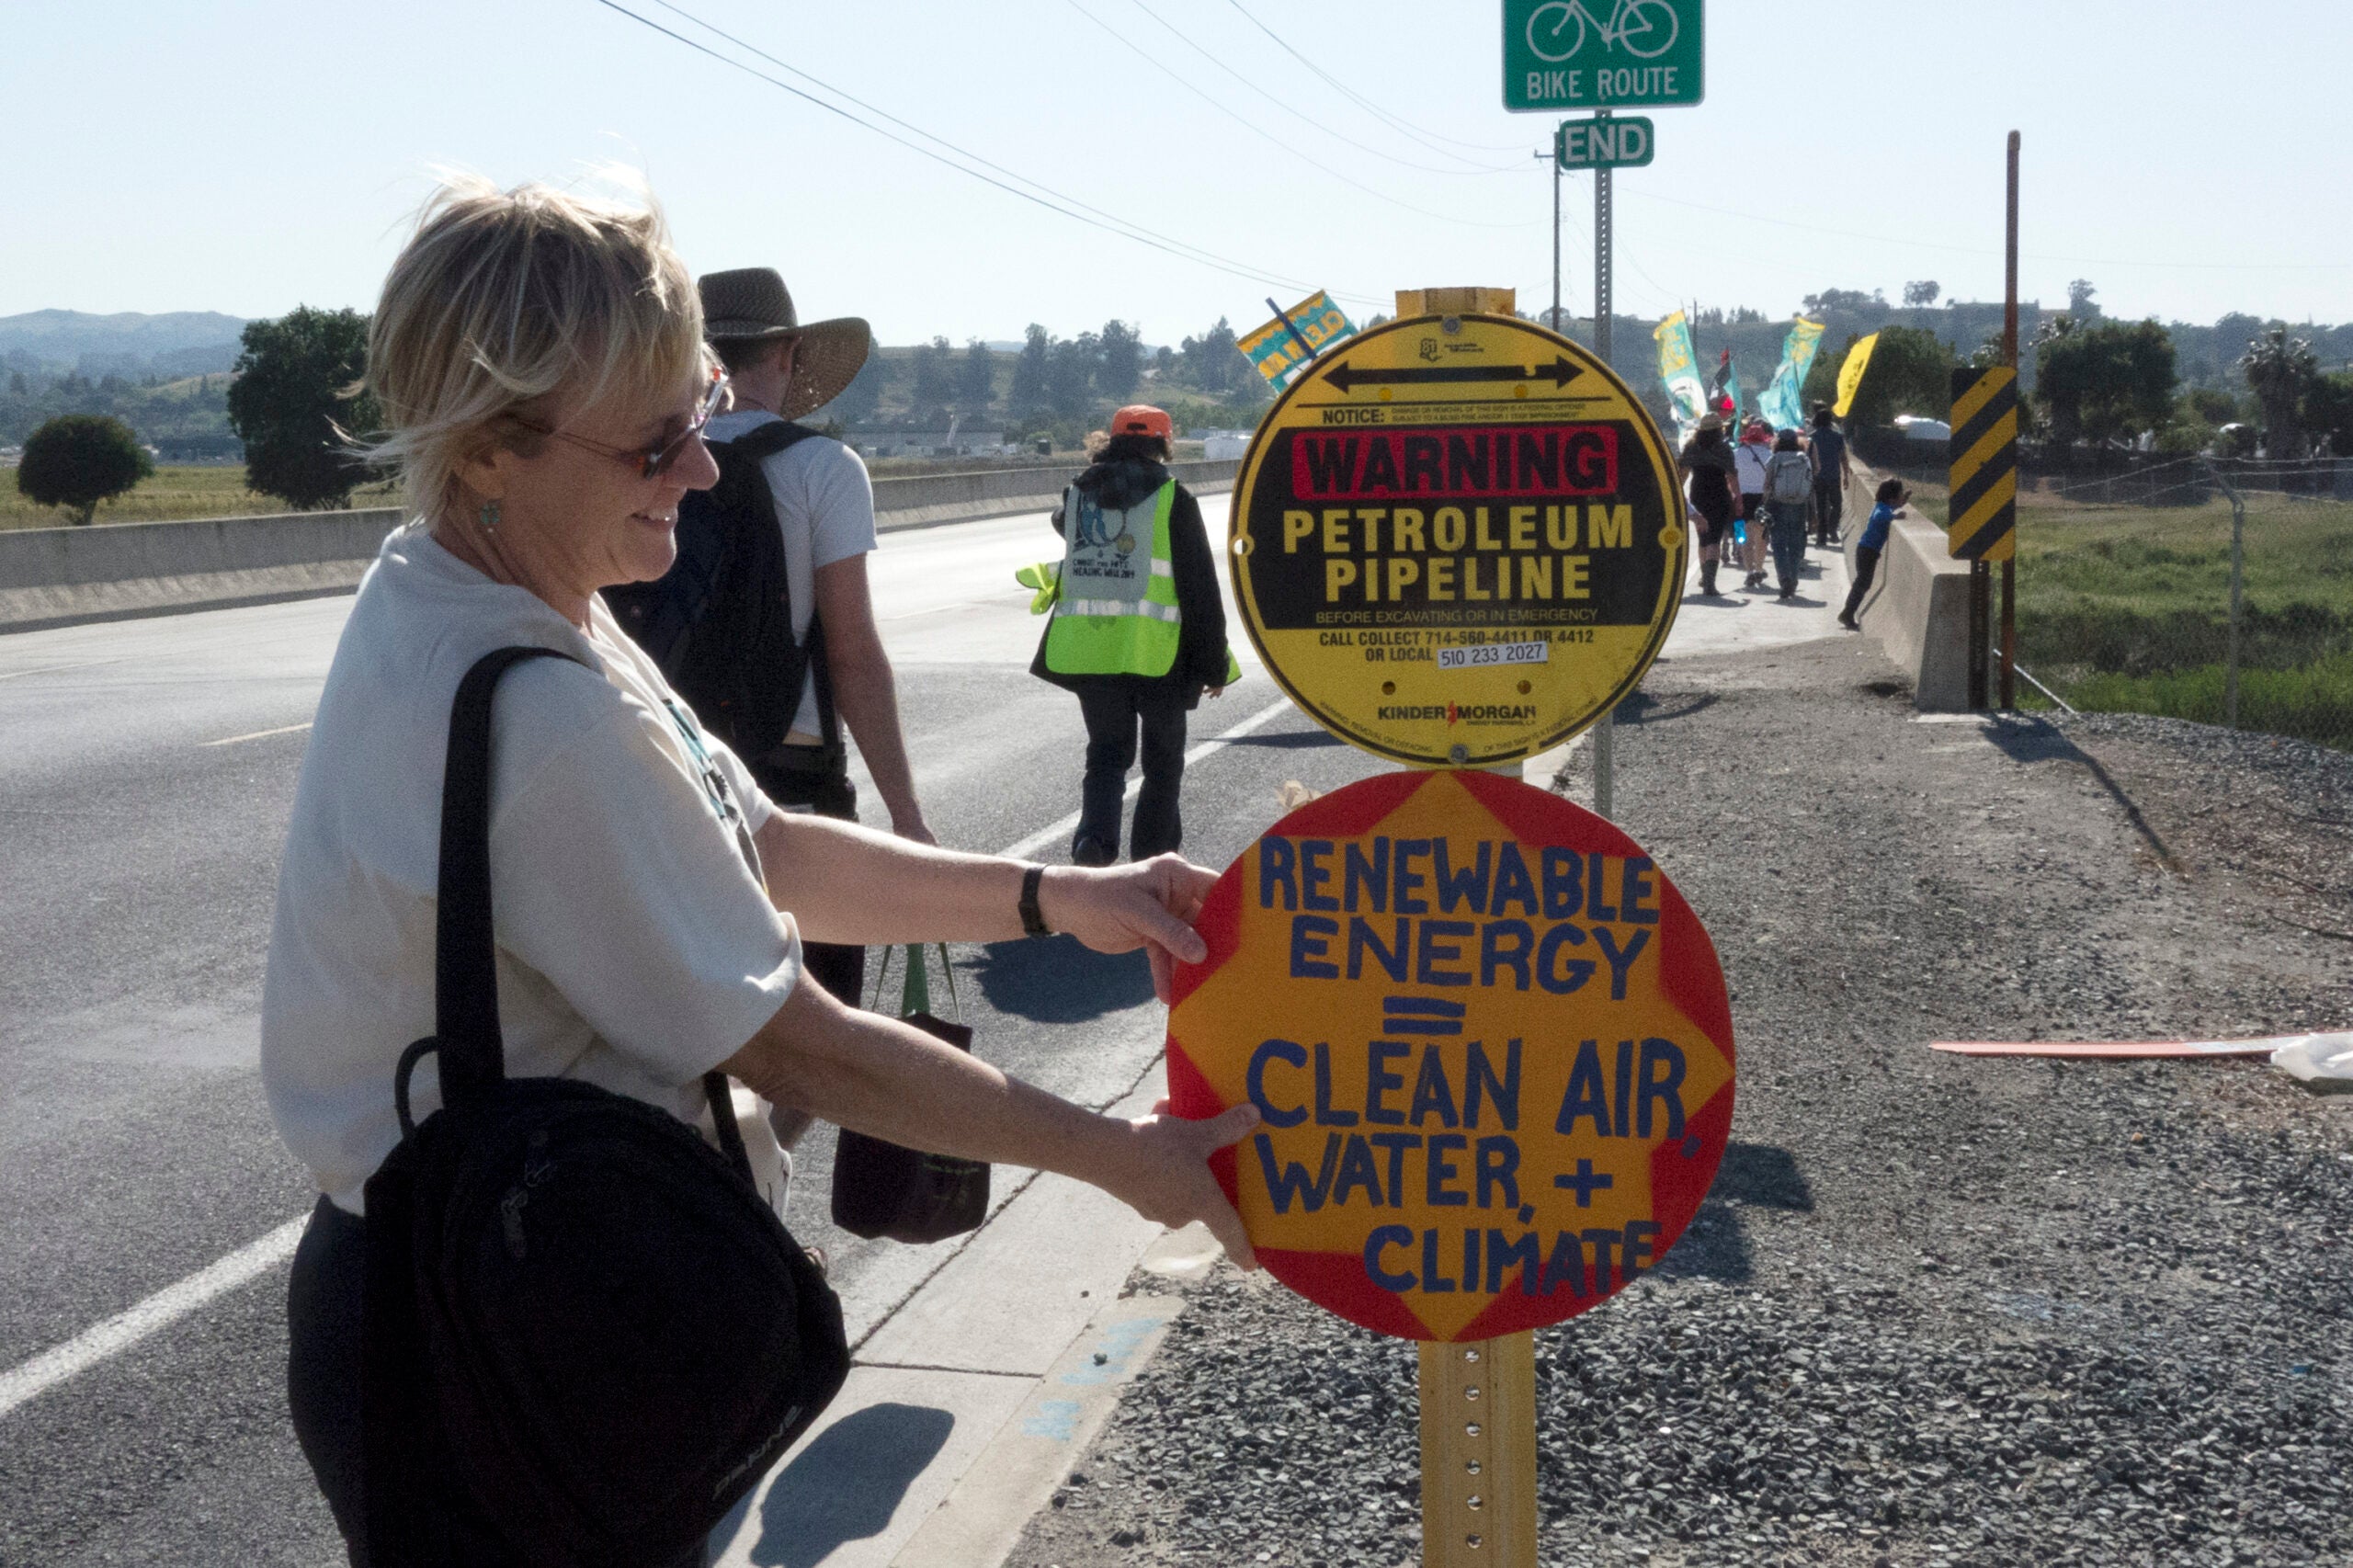 The Refinery Healing Walk is an opportunity to bring people together to combat air pollution issues.